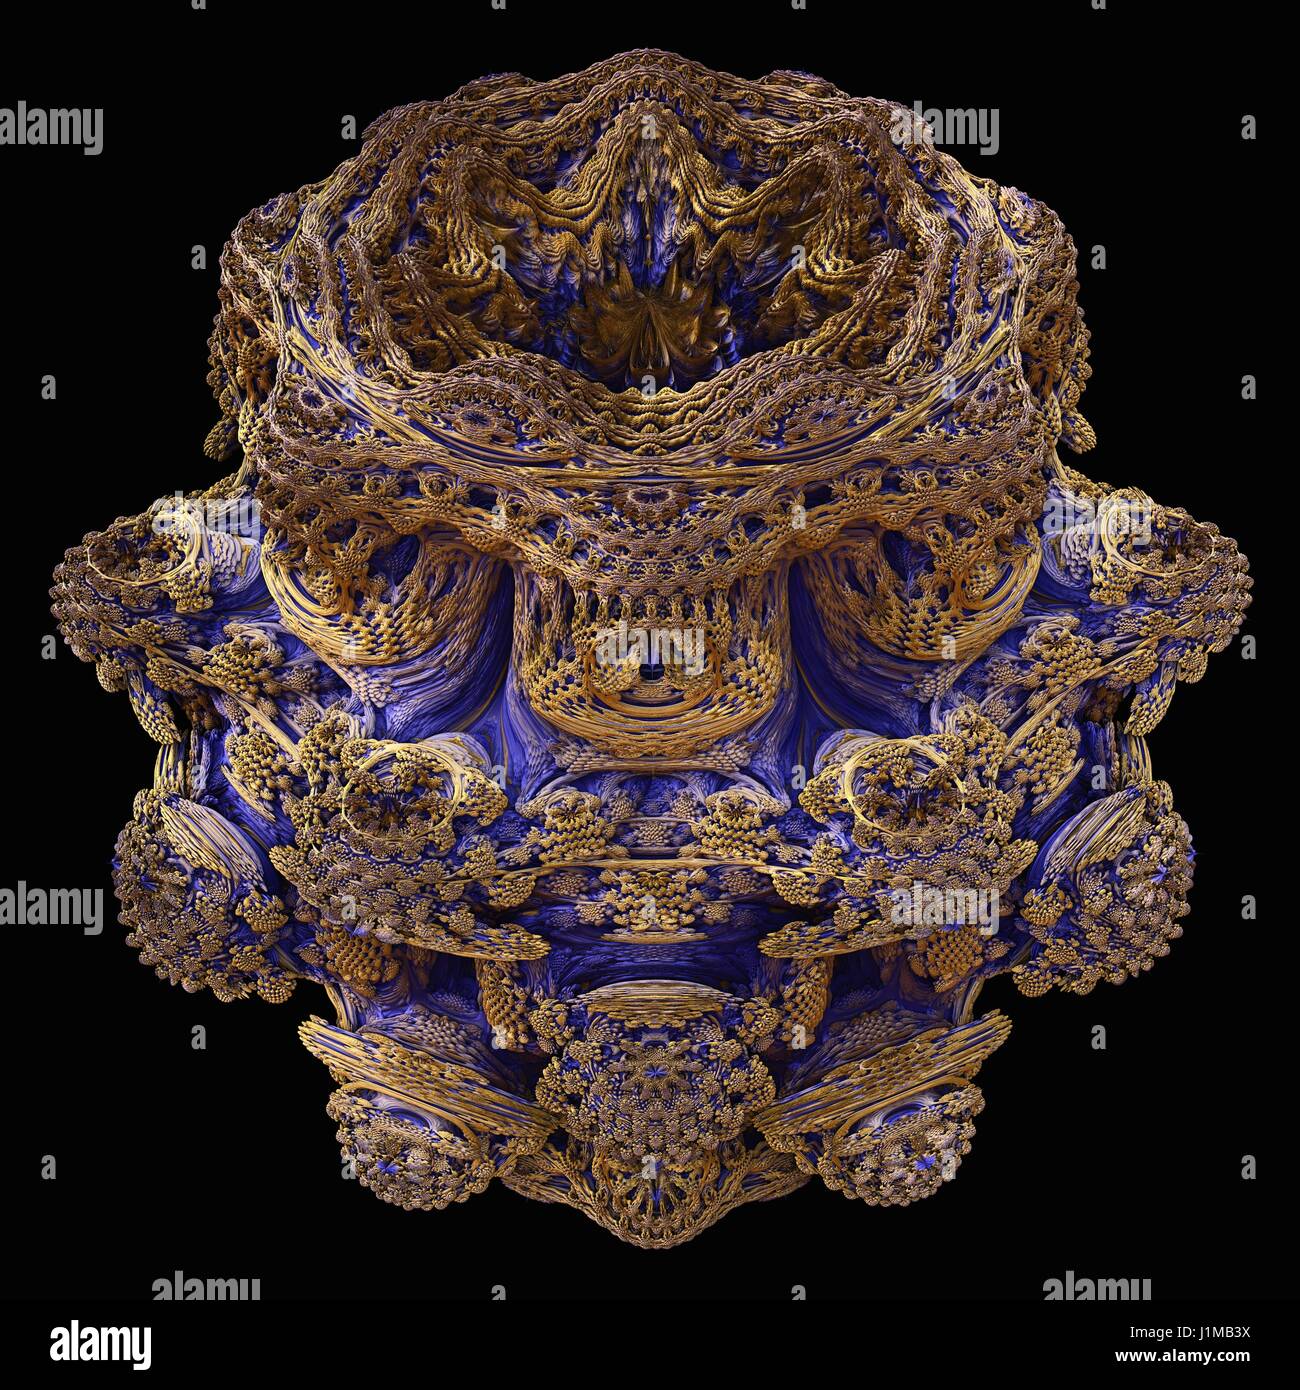 Mandelbulb fractal. Computer-generated image of a three-dimensional analogue derived form a Mandelbrot Set using spherical coordinates. Stock Photo